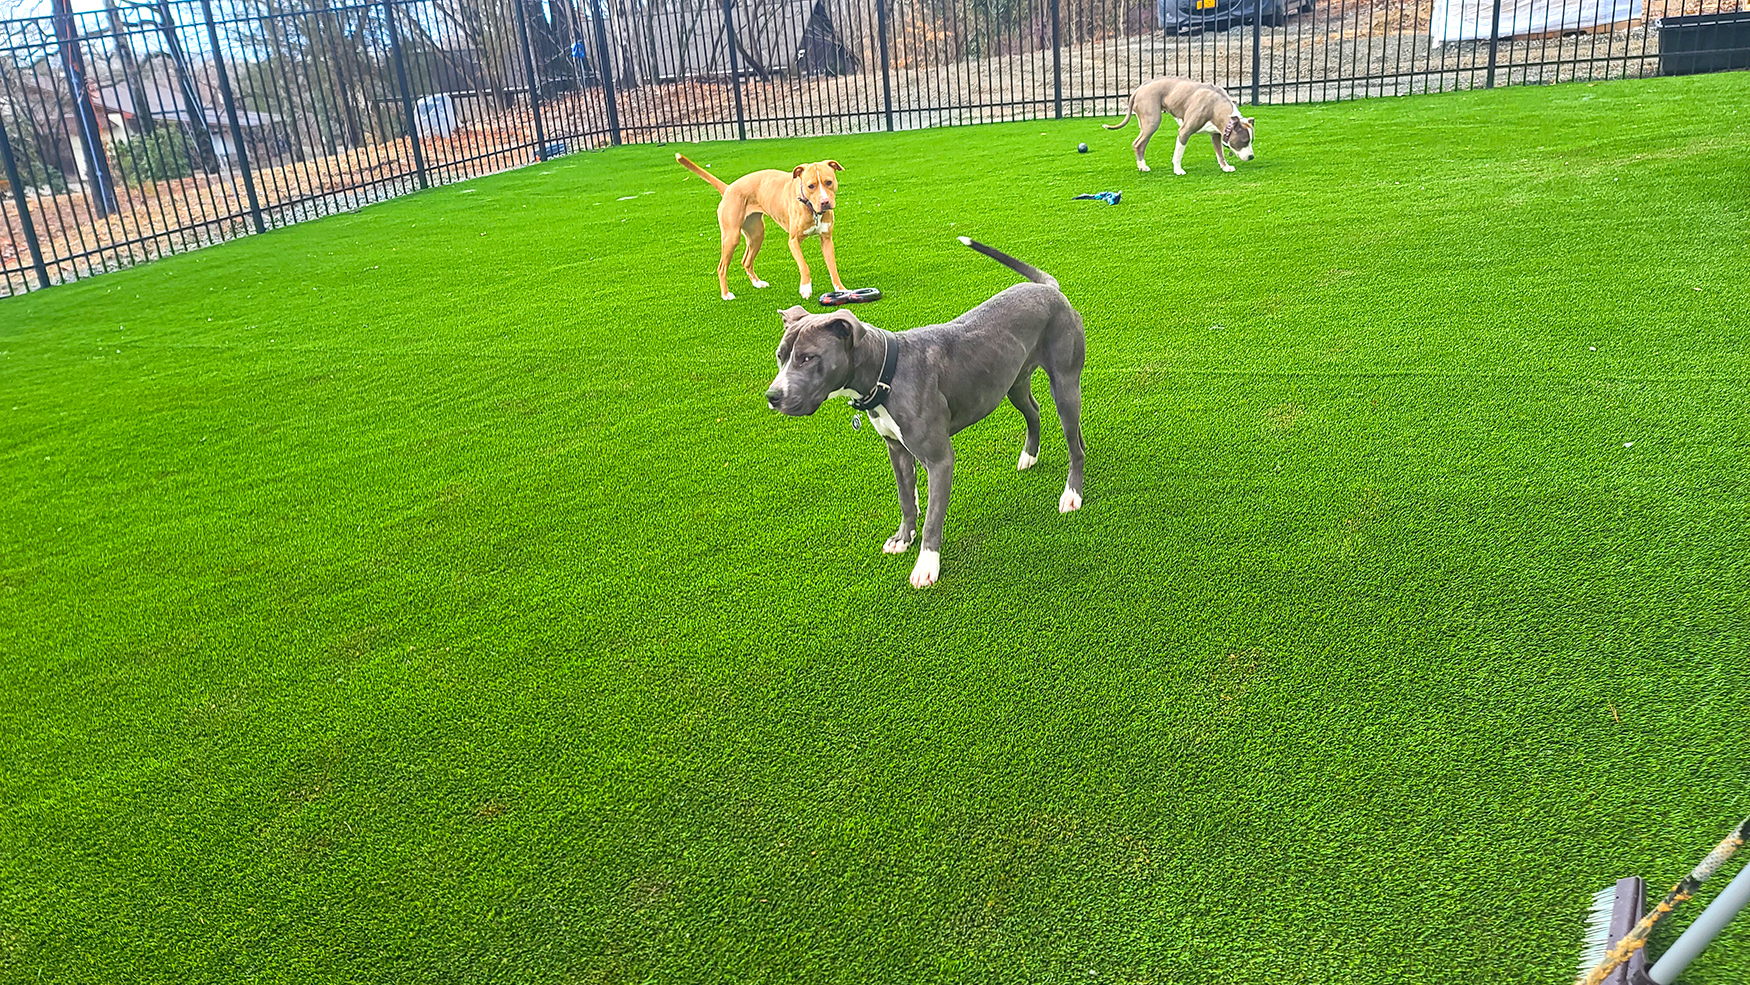 Advanced drainage system beneath artificial turf for dogs, ensuring efficient water flow and odor control for a clean outdoor space.